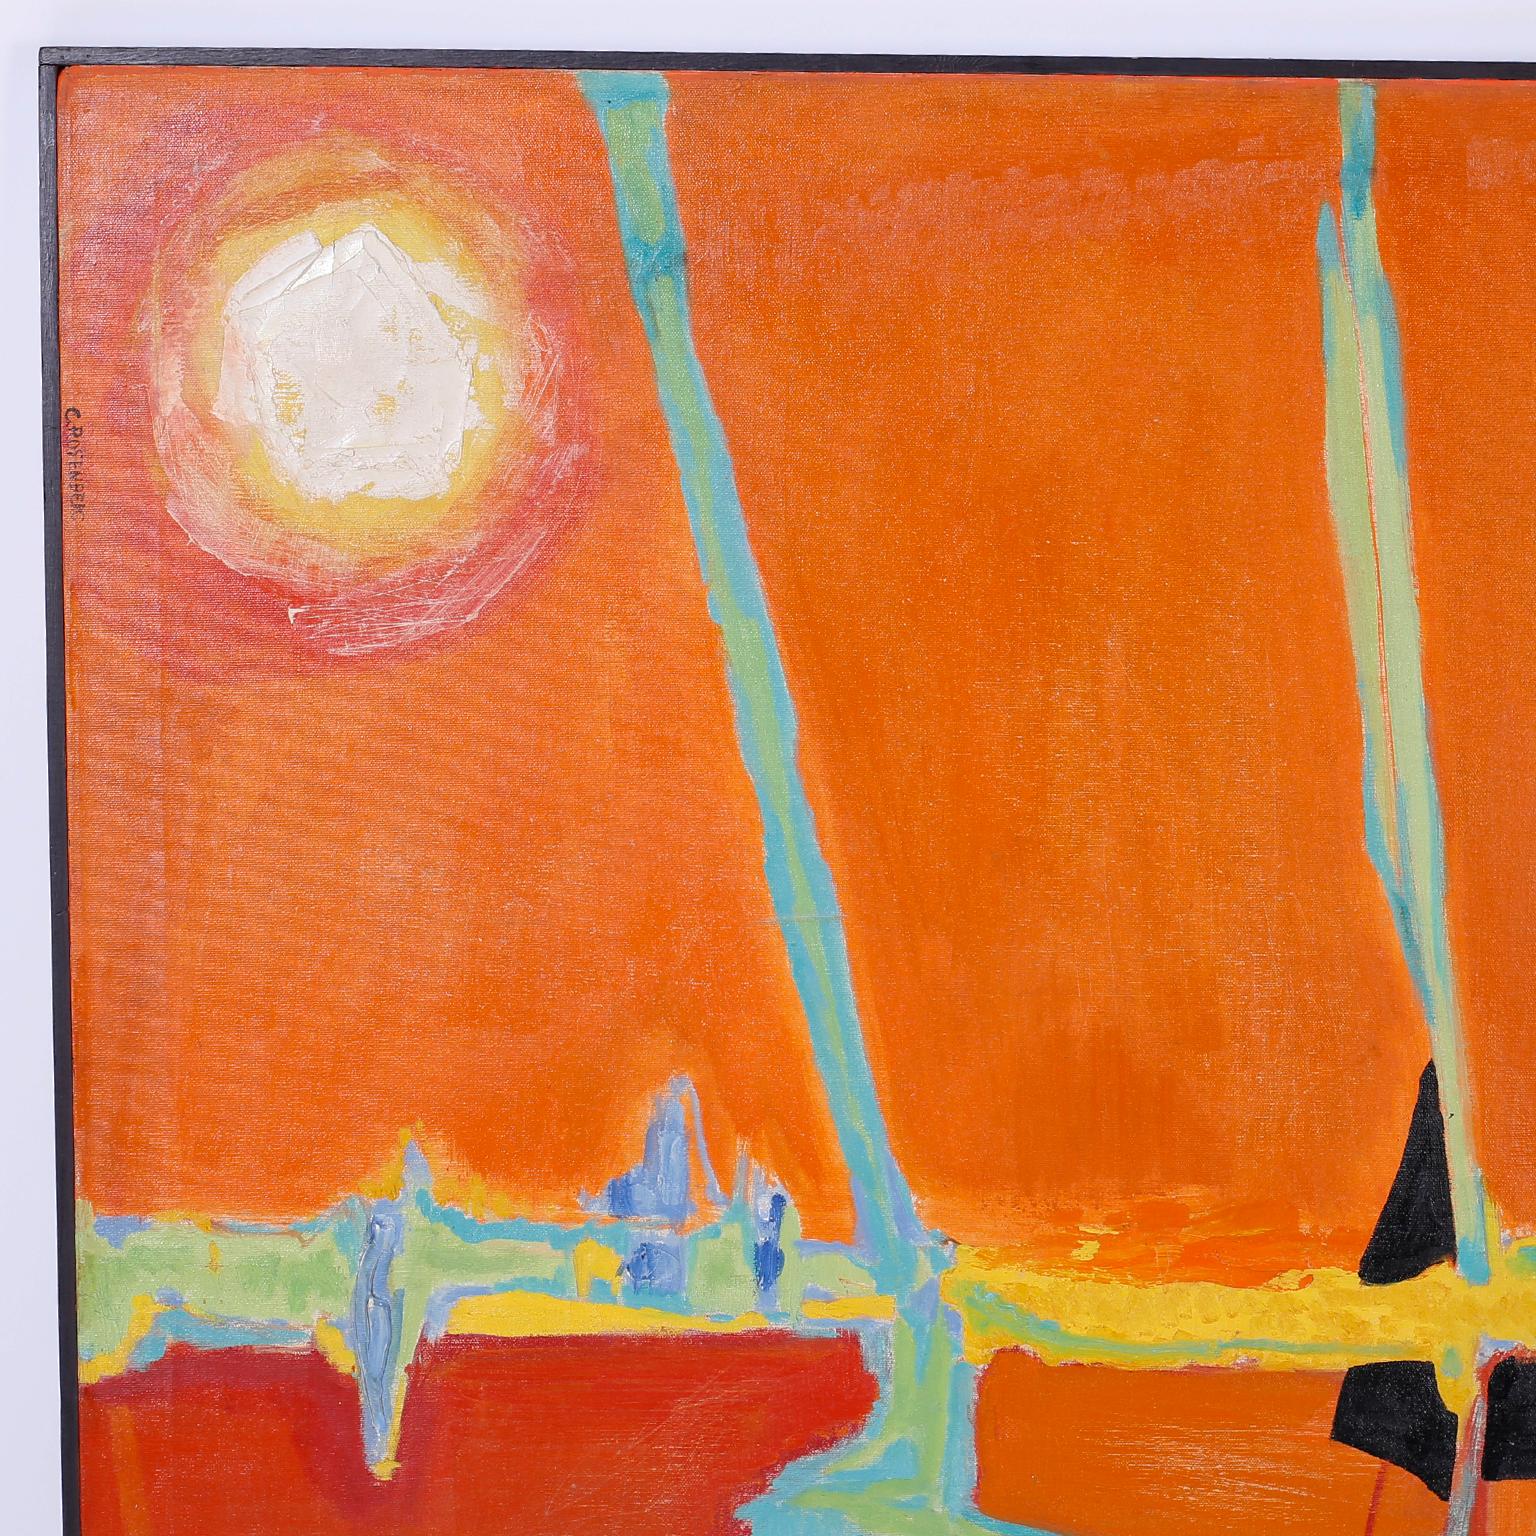 Striking modernist painting on canvas with a hot palette that conveys a strong reference to the sun's energy. Signed in the upper left C. Rosenberg and titled on the back 